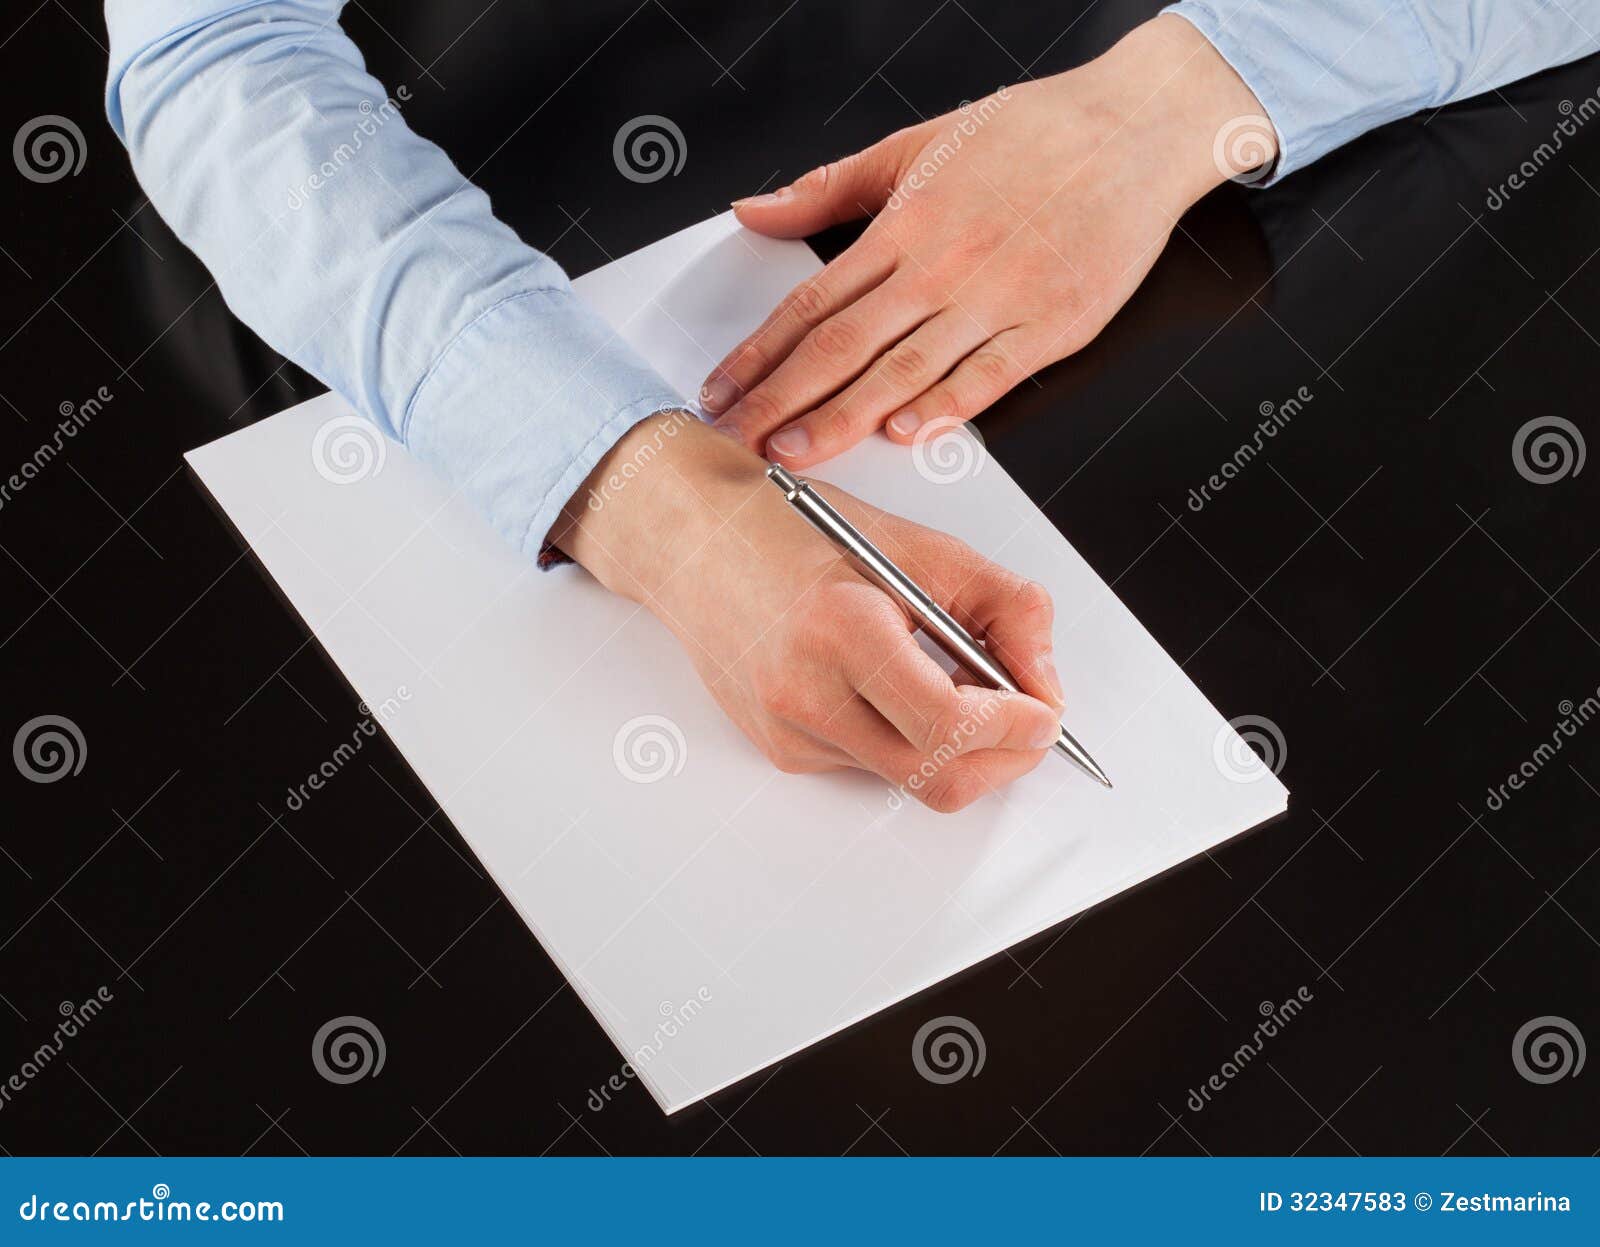 Businesswoman Writing Down Notes on the Paper (signing a Document ...